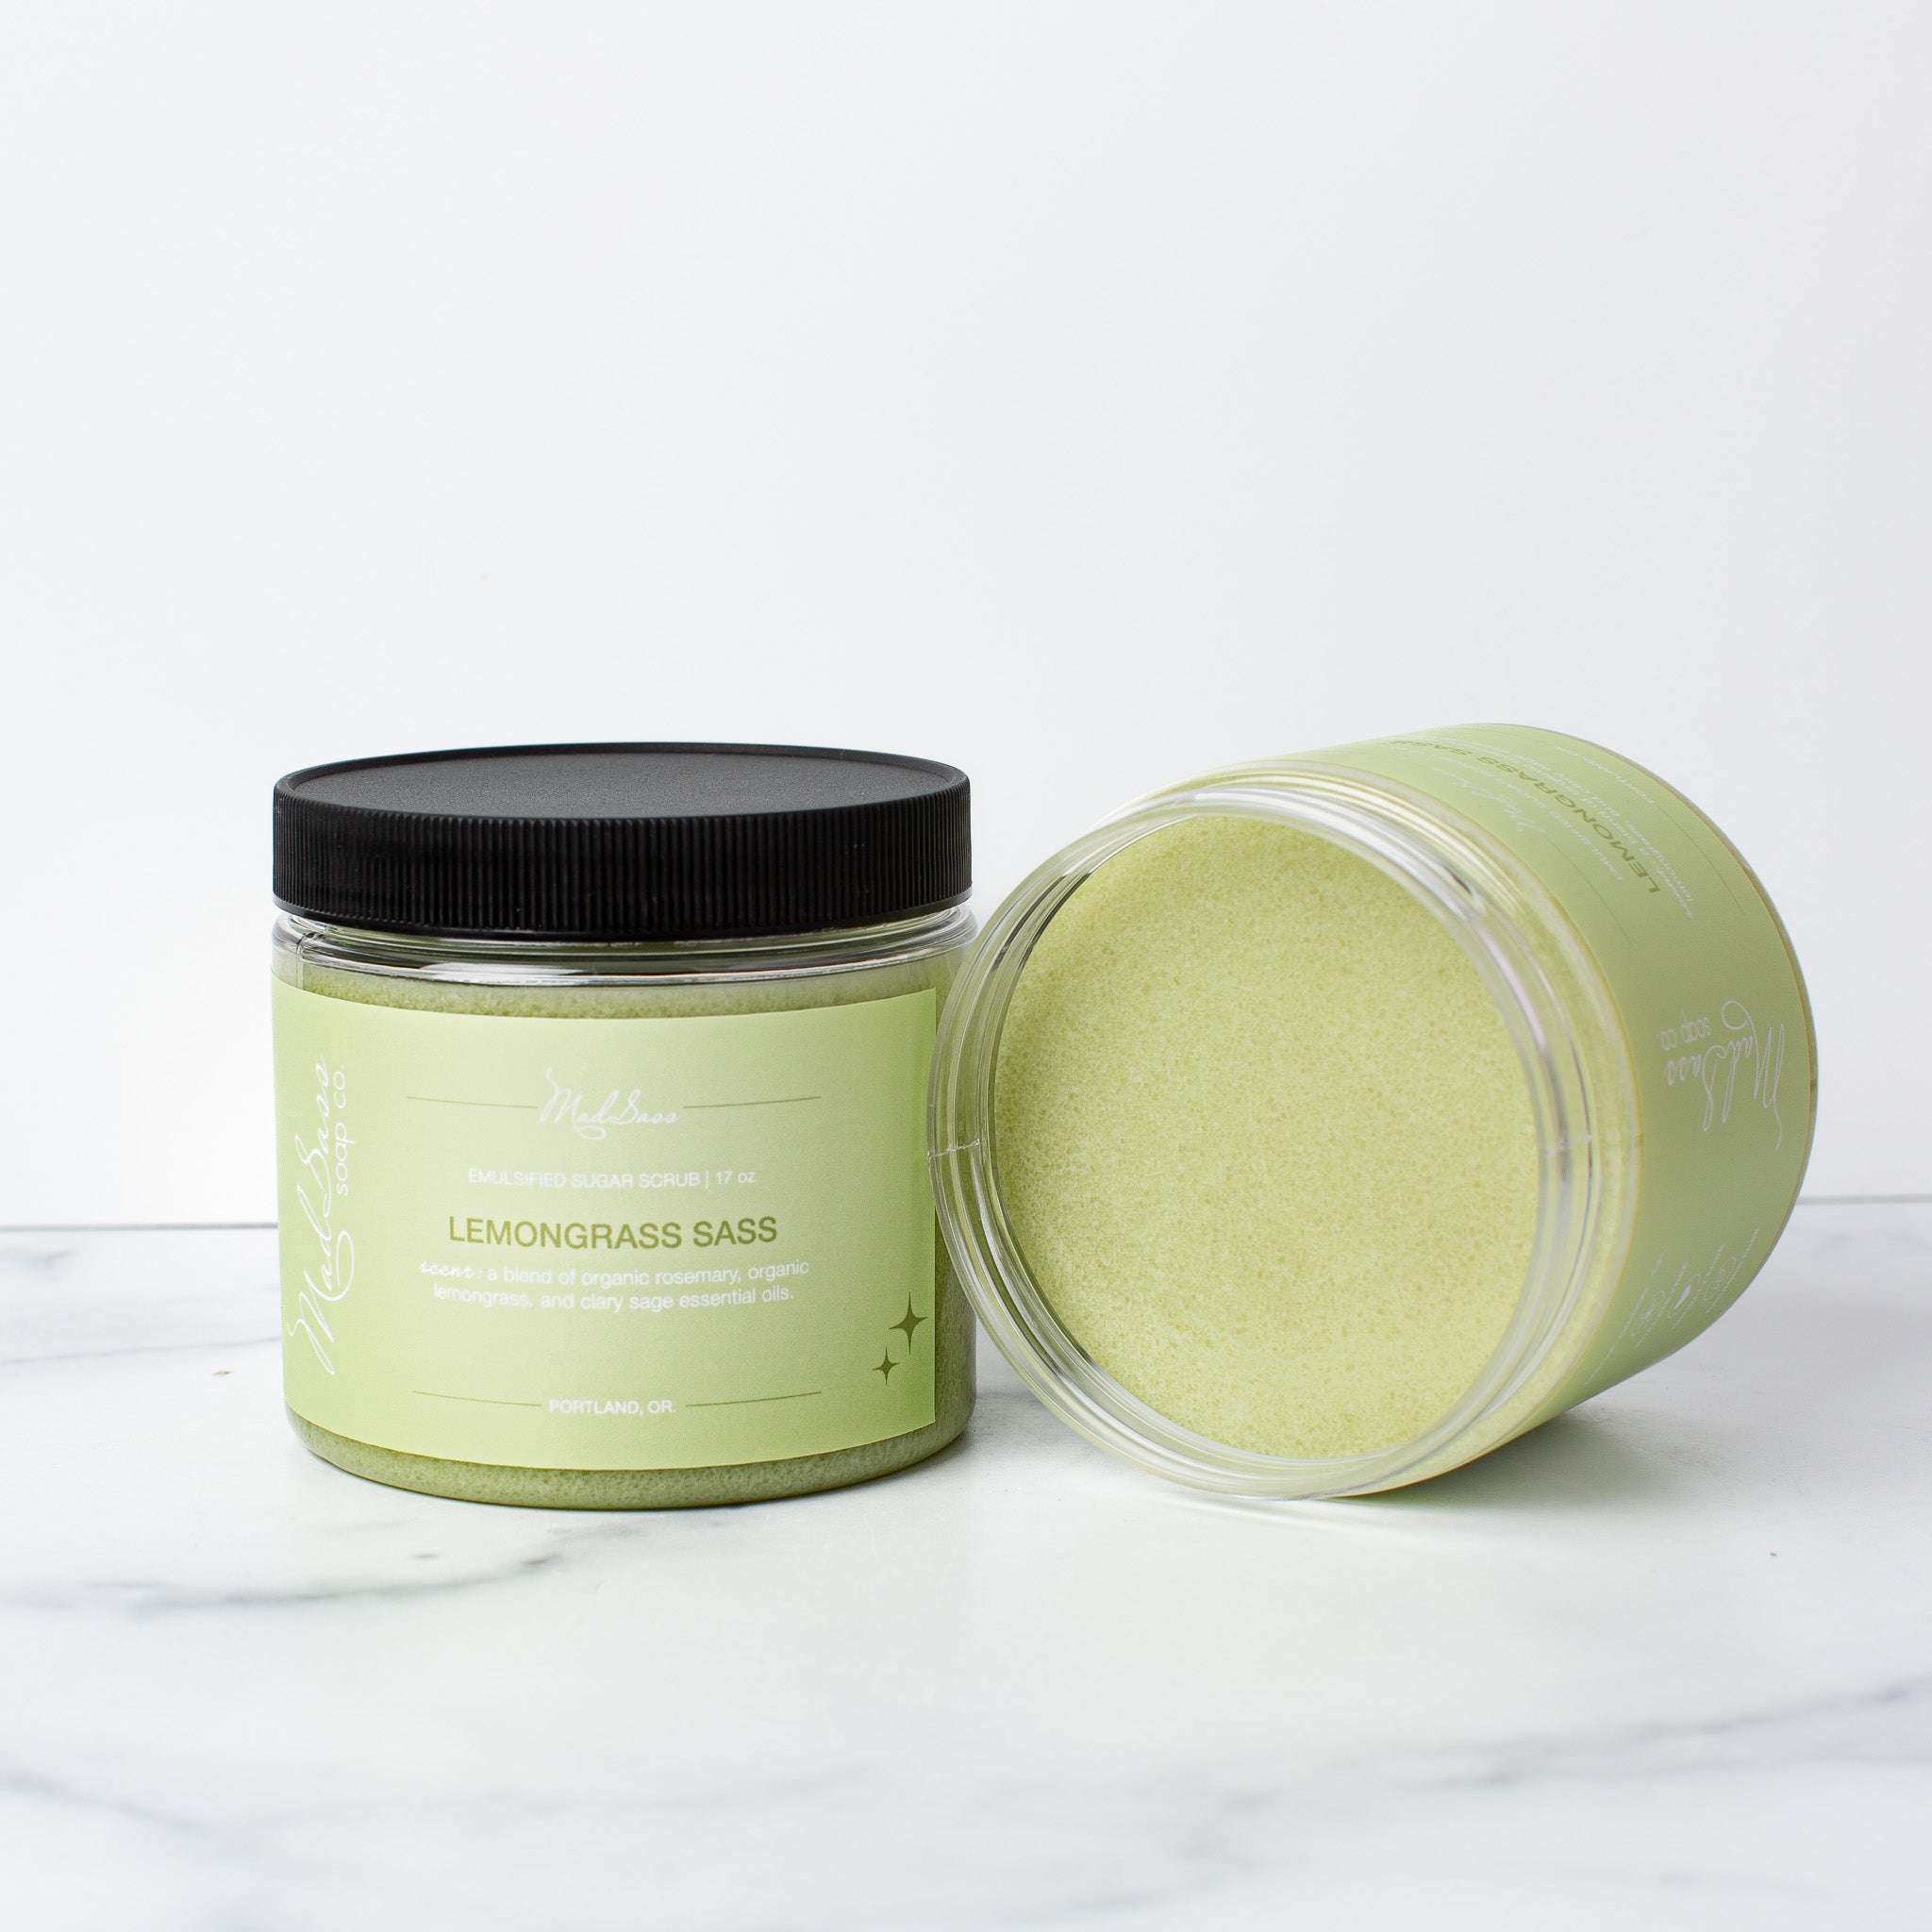 Two Lemongrass Sass Emulsified Sugar Scrubs, with one on its side, on a white background.